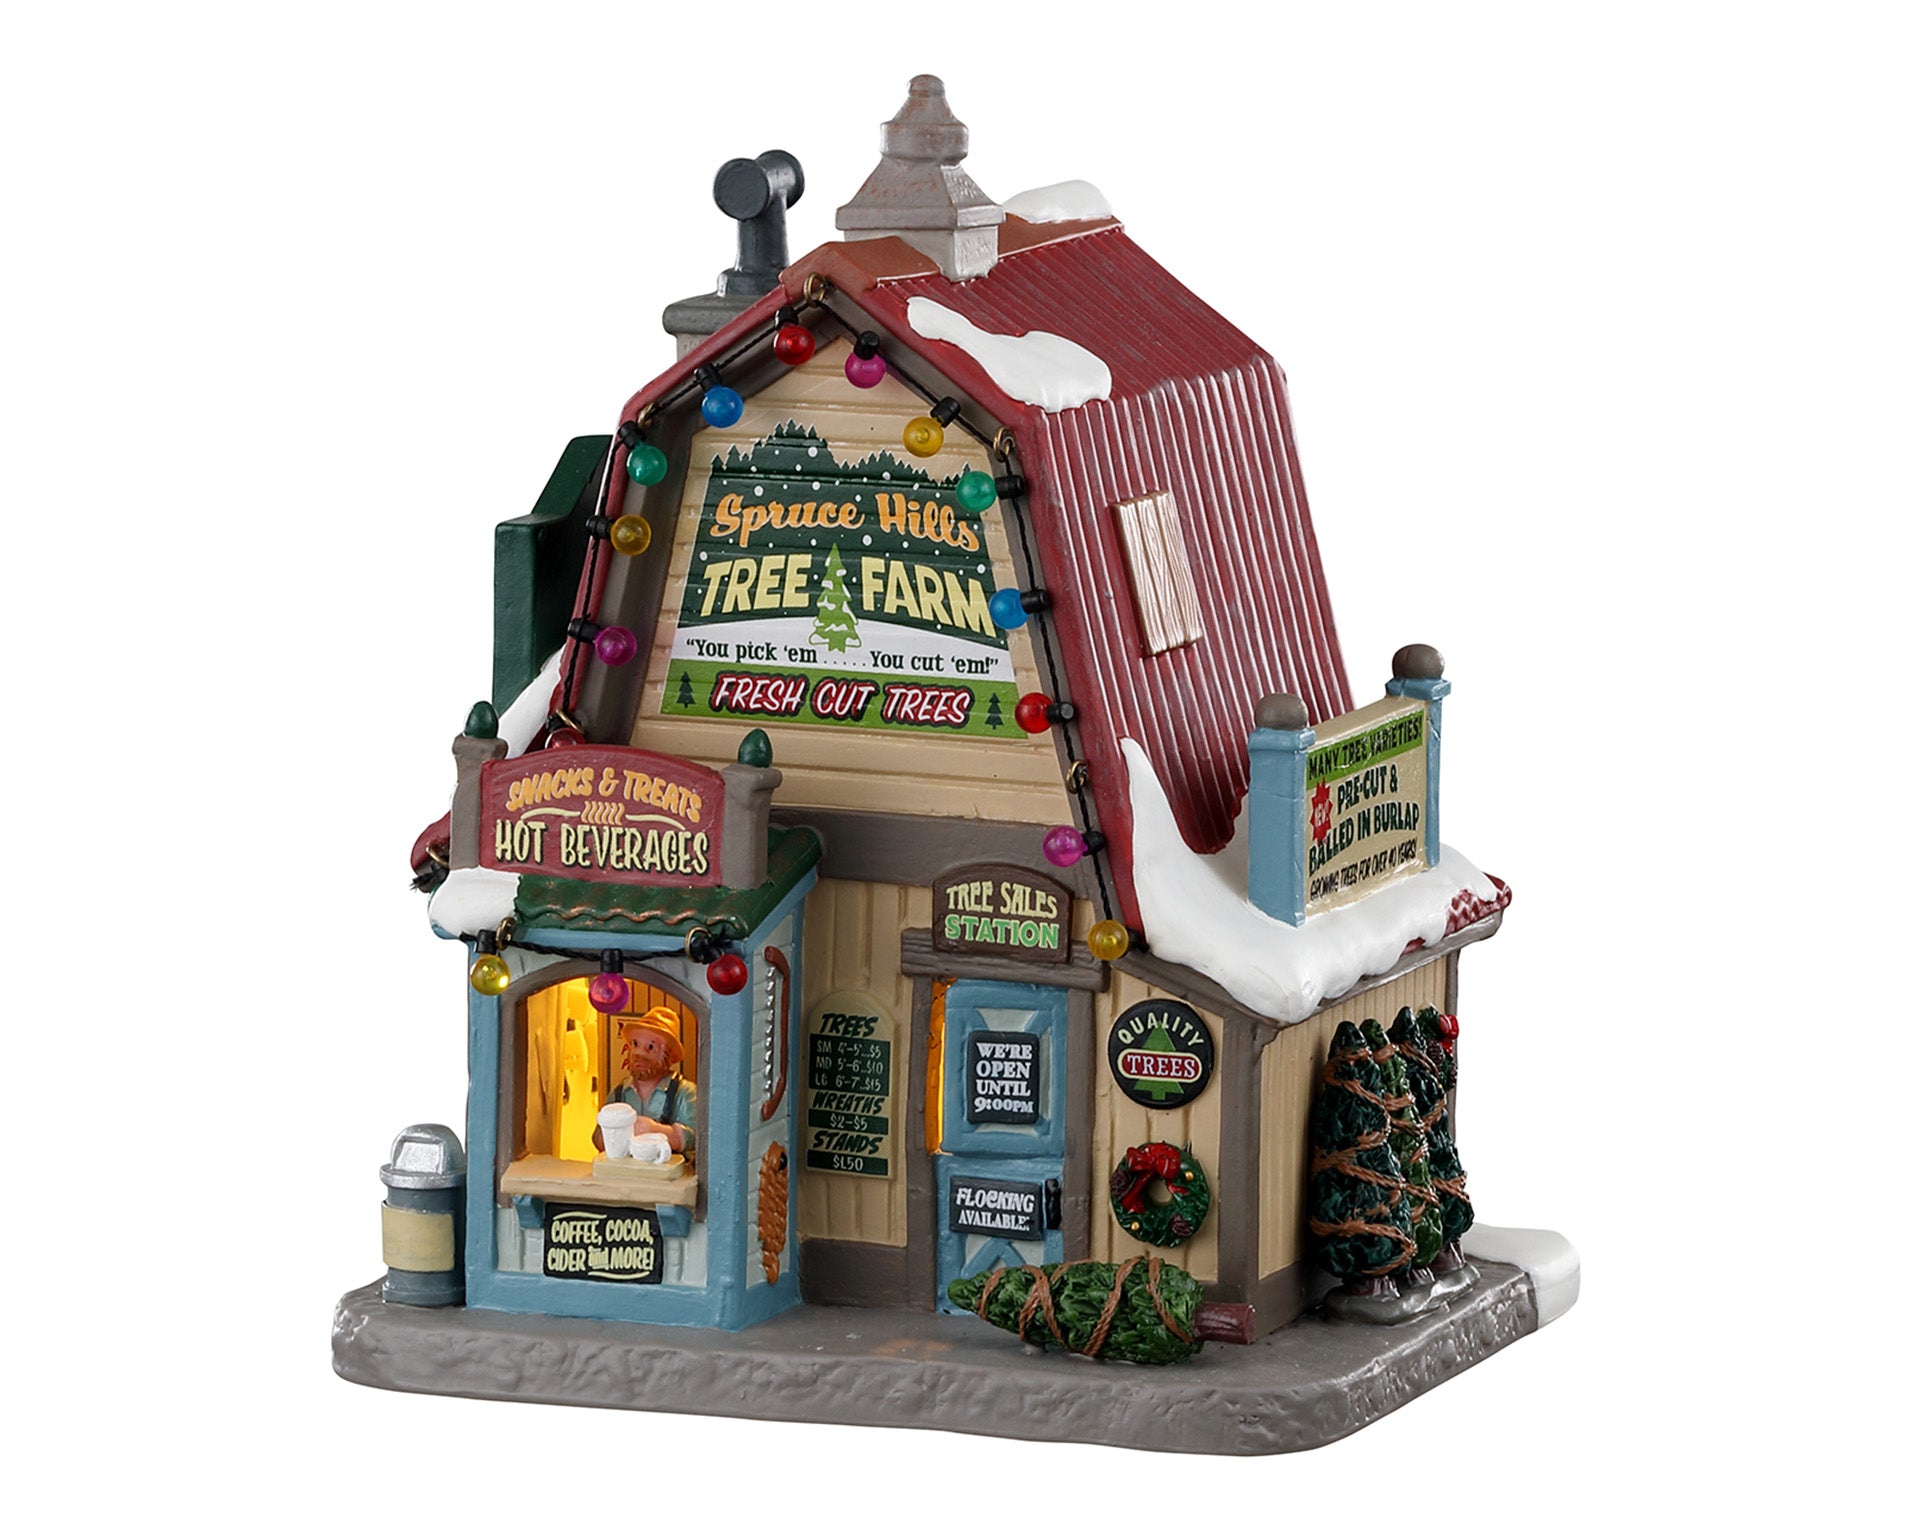 Lemax 05675 Spruce Hills Tree Farm, Standard Lighted Building- Gift Spice